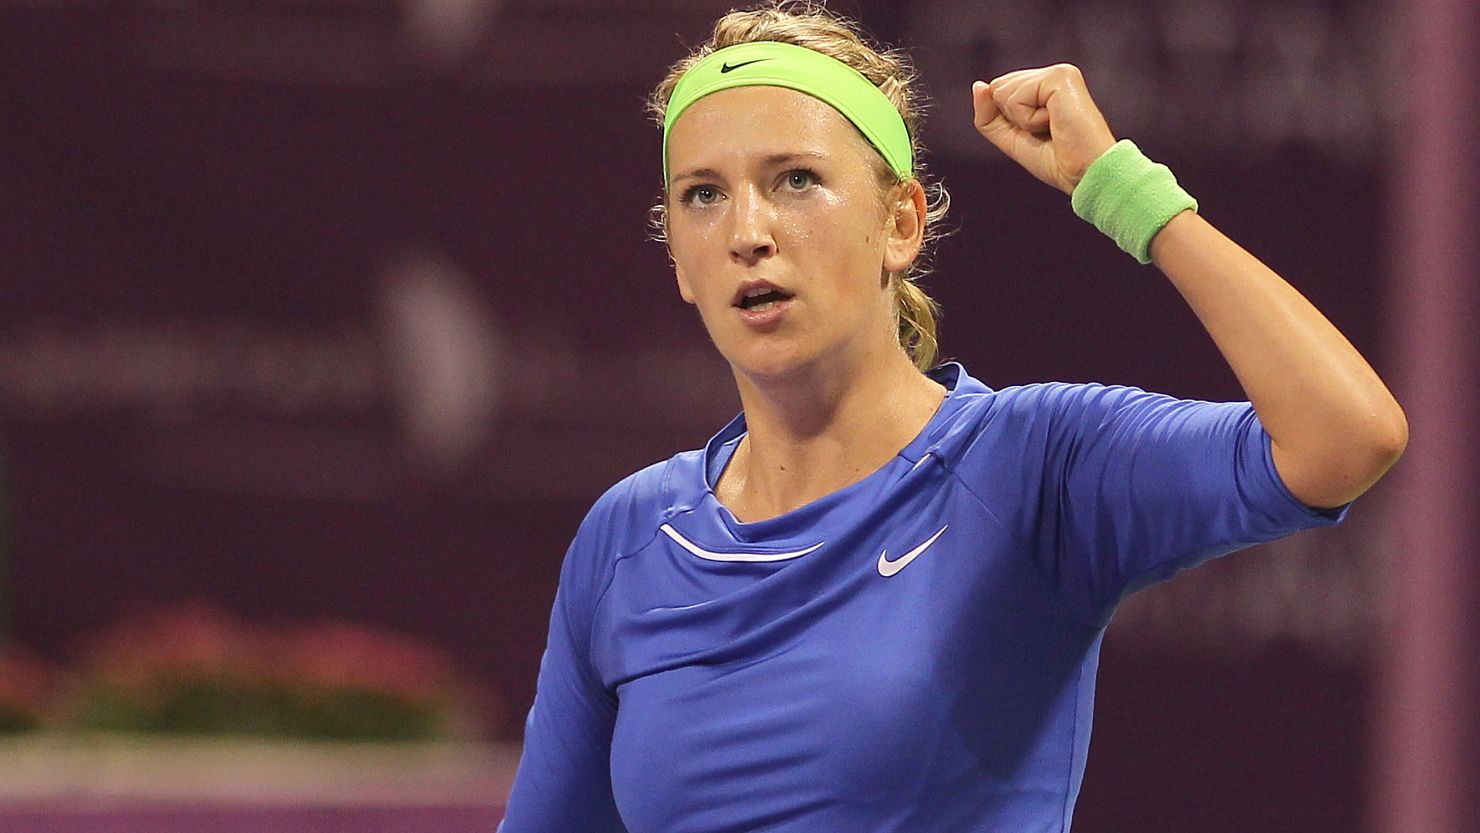 Victoria Azarenka took her third title of 2012 after beating Samantha Stosur at the Qatar Open in Doha.